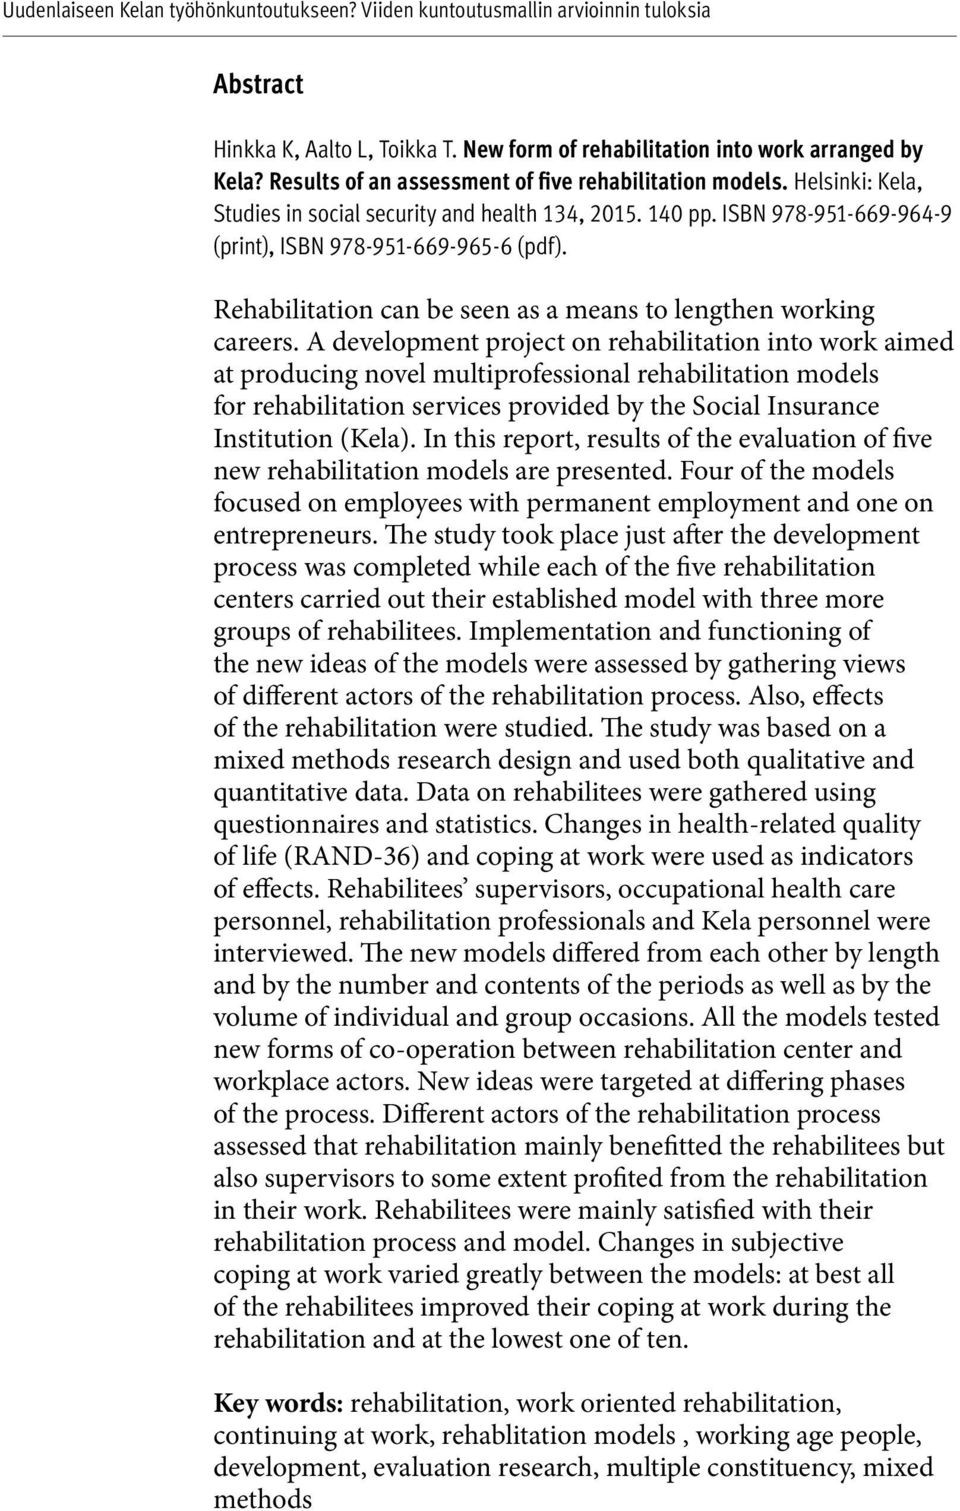 Rehabilitation can be seen as a means to lengthen working careers.